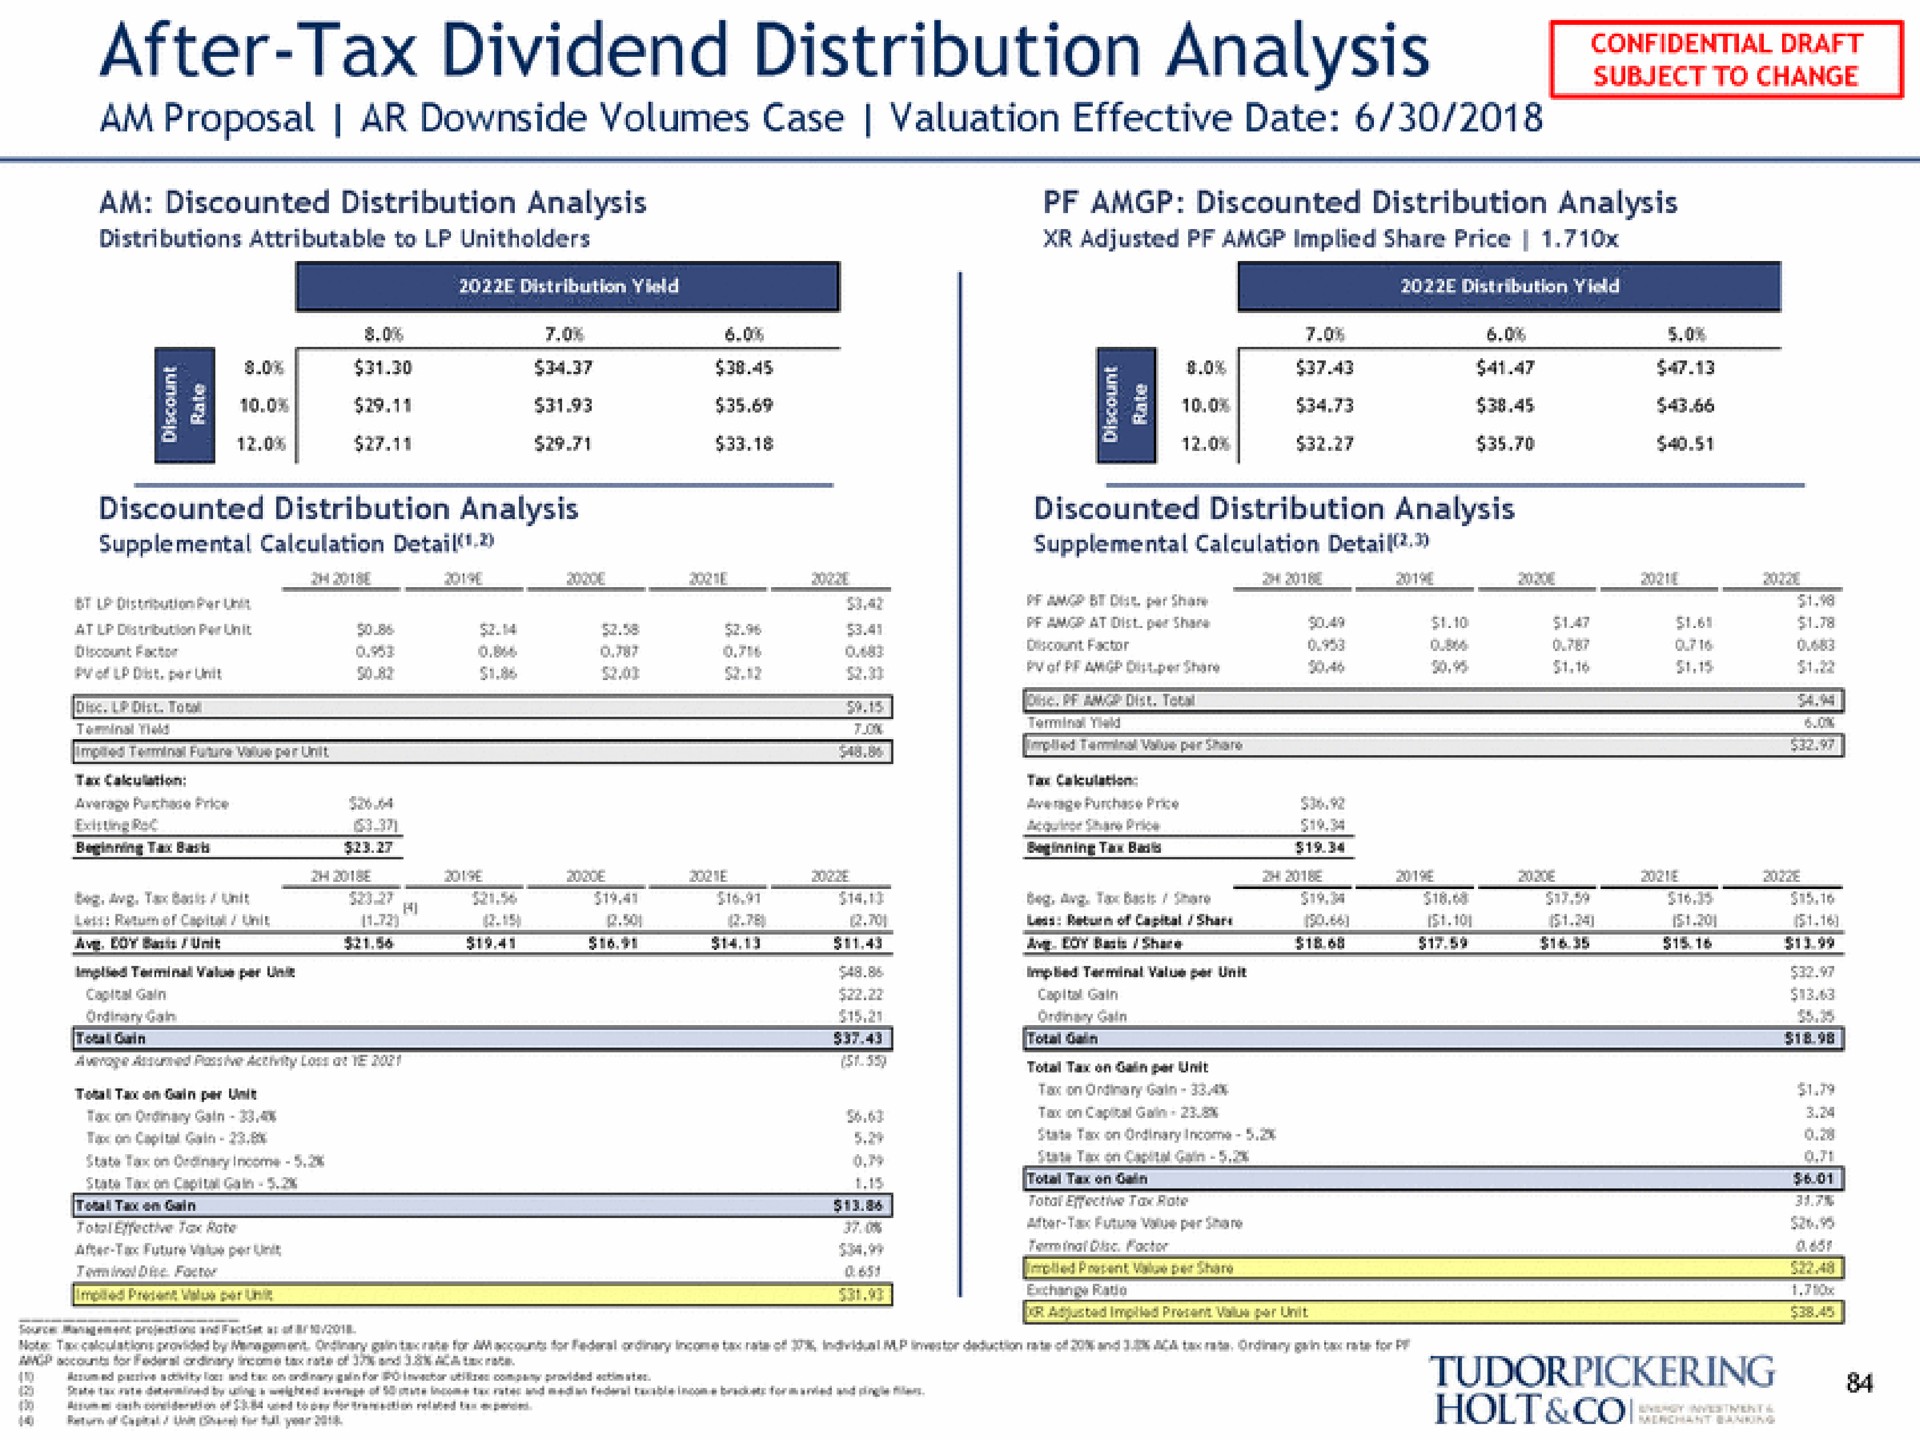 after tax dividend distribution analysis fee holt scree | Tudor, Pickering, Holt & Co